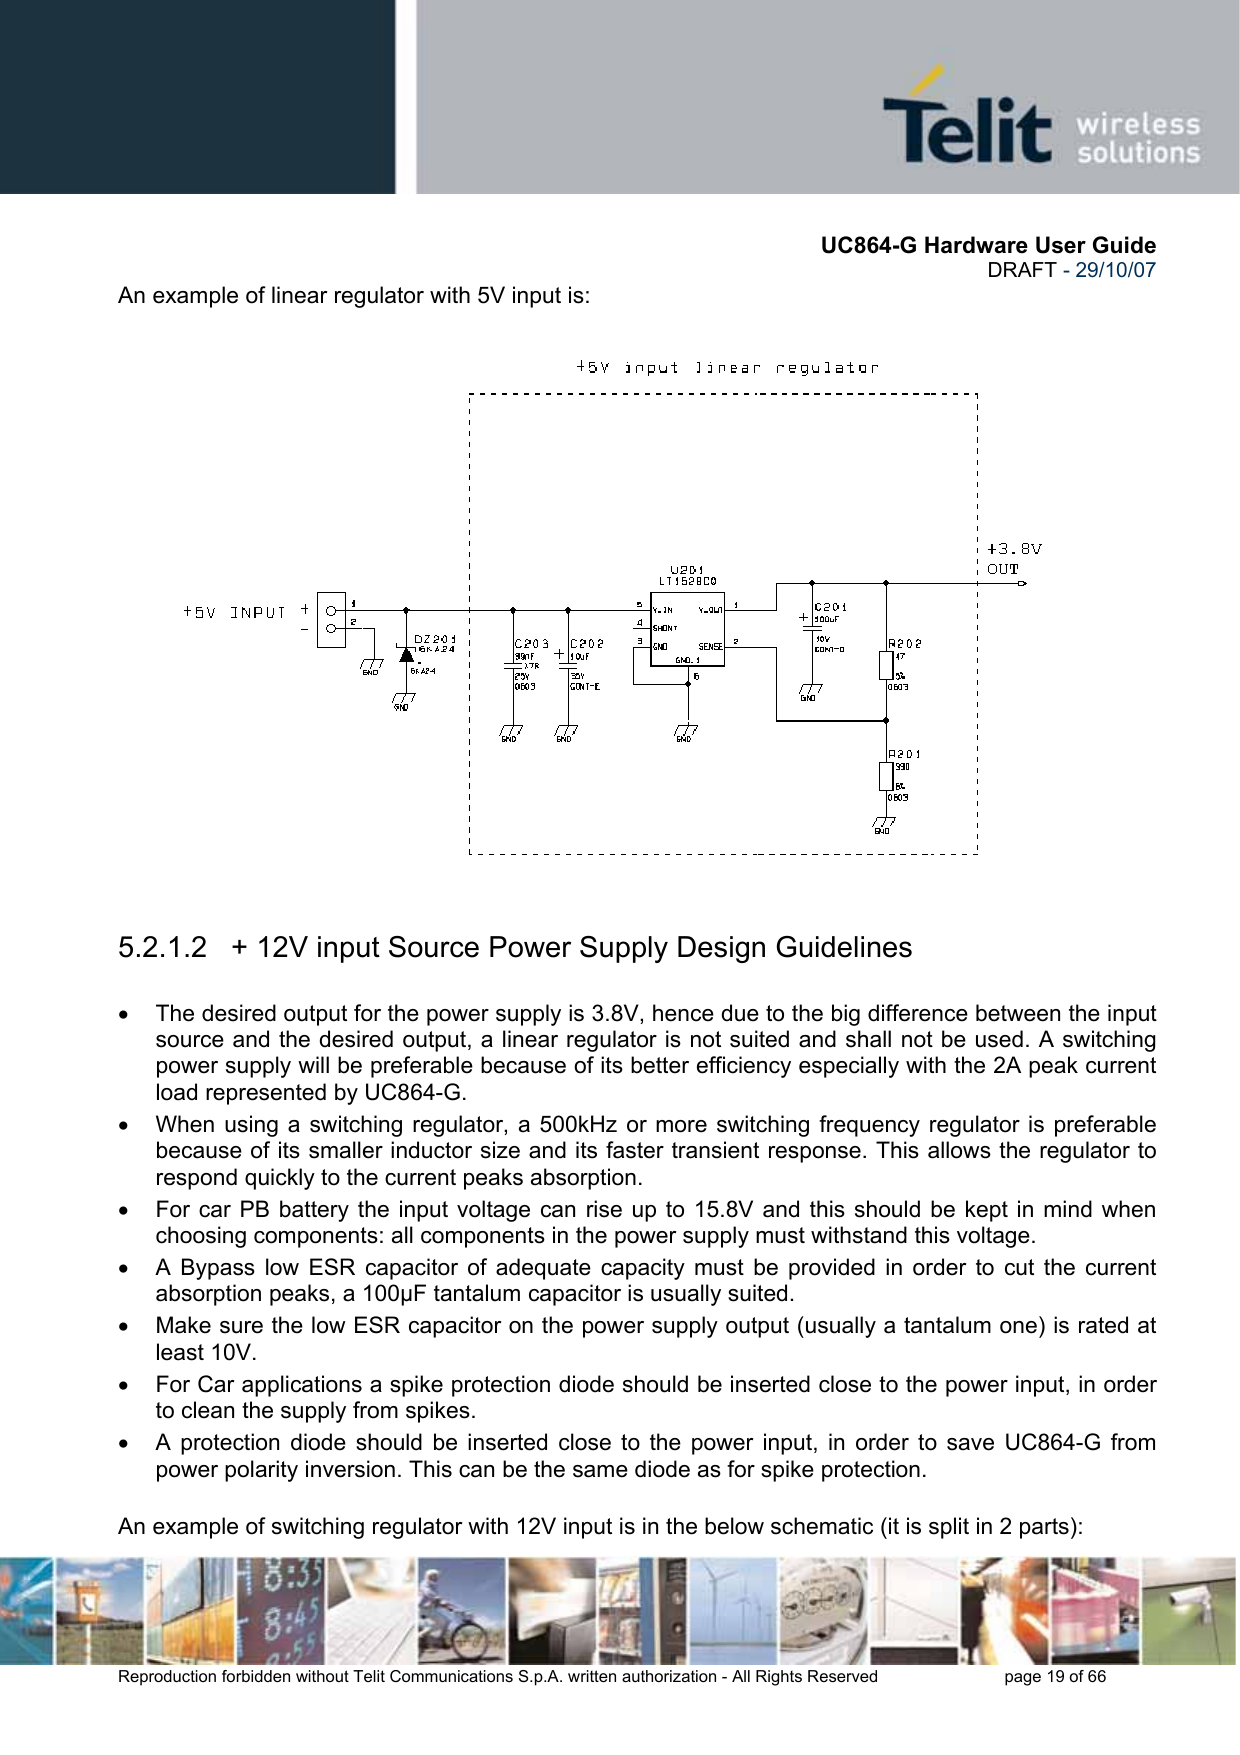       UC864-G Hardware User Guide  DRAFT - 29/10/07      Reproduction forbidden without Telit Communications S.p.A. written authorization - All Rights Reserved    page 19 of 66  An example of linear regulator with 5V input is:    5.2.1.2   + 12V input Source Power Supply Design Guidelines  •  The desired output for the power supply is 3.8V, hence due to the big difference between the input source and the desired output, a linear regulator is not suited and shall not be used. A switching power supply will be preferable because of its better efficiency especially with the 2A peak current load represented by UC864-G. •  When using a switching regulator, a 500kHz or more switching frequency regulator is preferable because of its smaller inductor size and its faster transient response. This allows the regulator to respond quickly to the current peaks absorption.  •  For car PB battery the input voltage can rise up to 15.8V and this should be kept in mind when choosing components: all components in the power supply must withstand this voltage. •  A Bypass low ESR capacitor of adequate capacity must be provided in order to cut the current absorption peaks, a 100µF tantalum capacitor is usually suited. •  Make sure the low ESR capacitor on the power supply output (usually a tantalum one) is rated at least 10V. •  For Car applications a spike protection diode should be inserted close to the power input, in order to clean the supply from spikes.  •  A protection diode should be inserted close to the power input, in order to save UC864-G from power polarity inversion. This can be the same diode as for spike protection.  An example of switching regulator with 12V input is in the below schematic (it is split in 2 parts): 